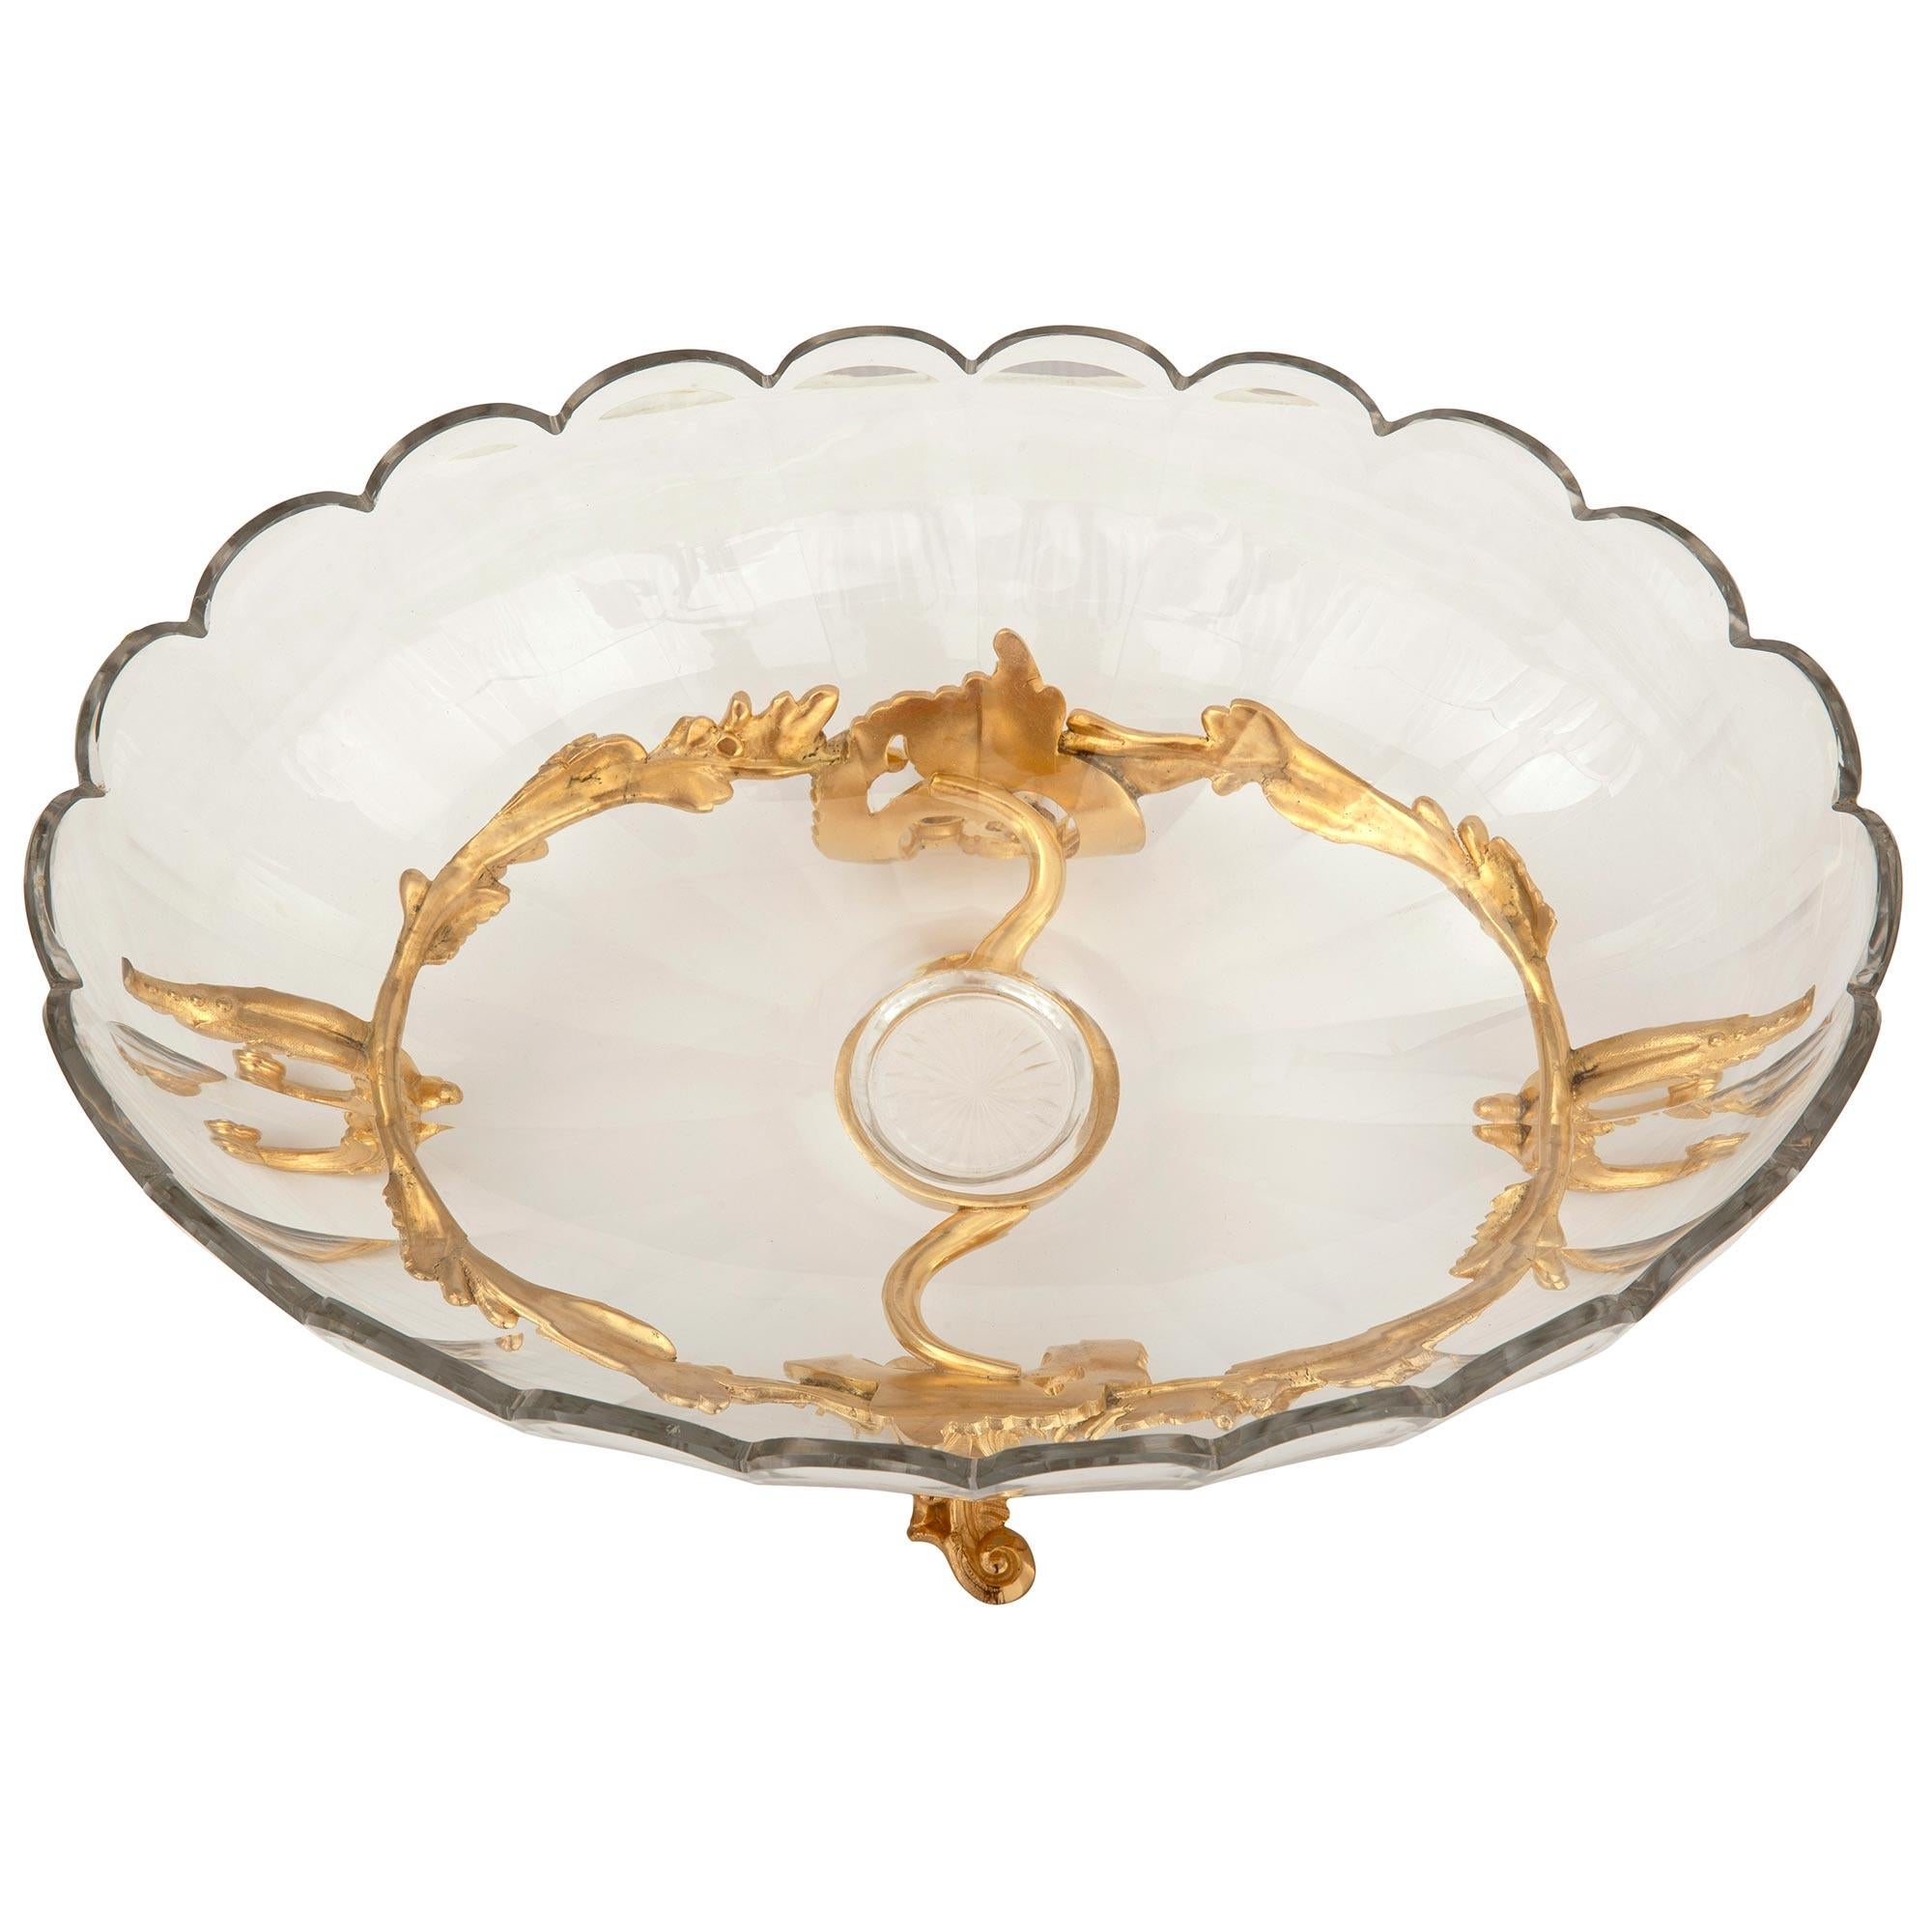 A charming and most elegant French 19th century Louis XV st. ormolu and Baccarat crystal centerpiece. The centerpiece is raised by a beautiful pierced scrolled central reserve with a fine reeded design and striking scrolled foliate legs at each side